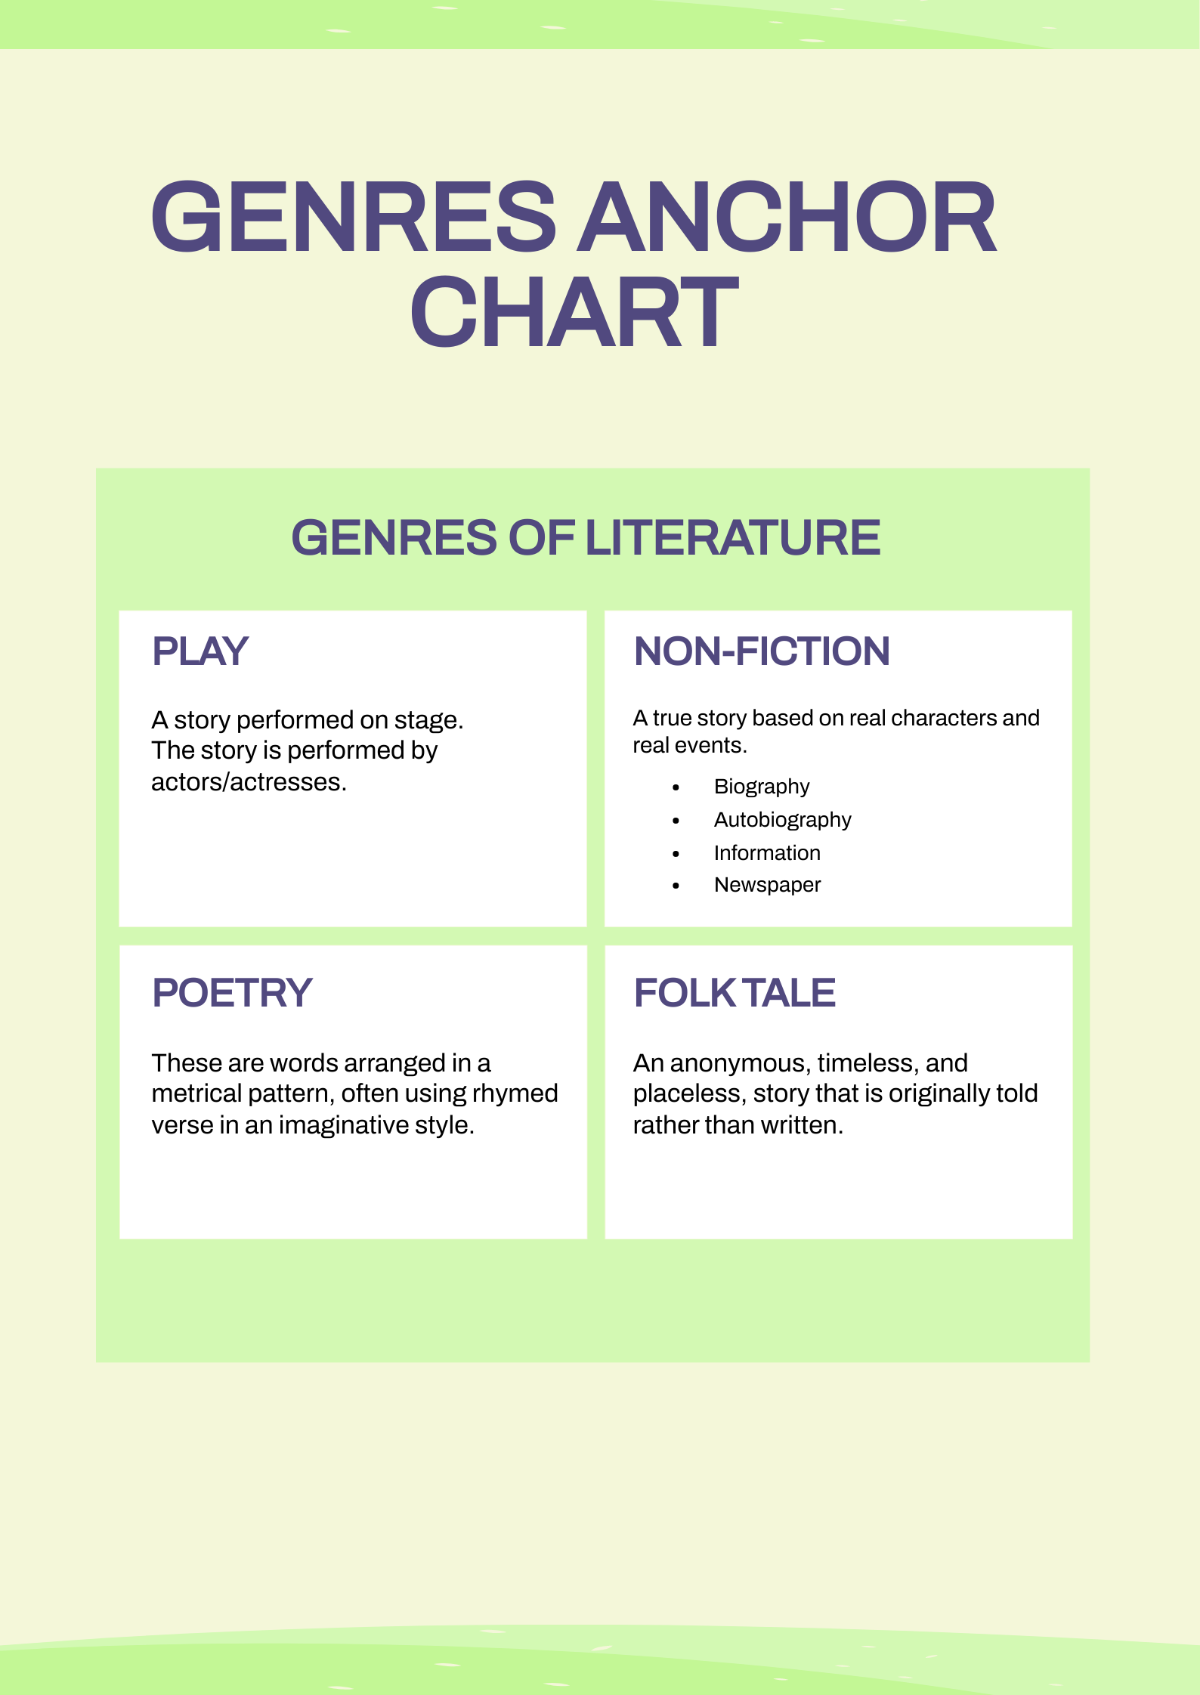 Free Genres Anchor Chart Template